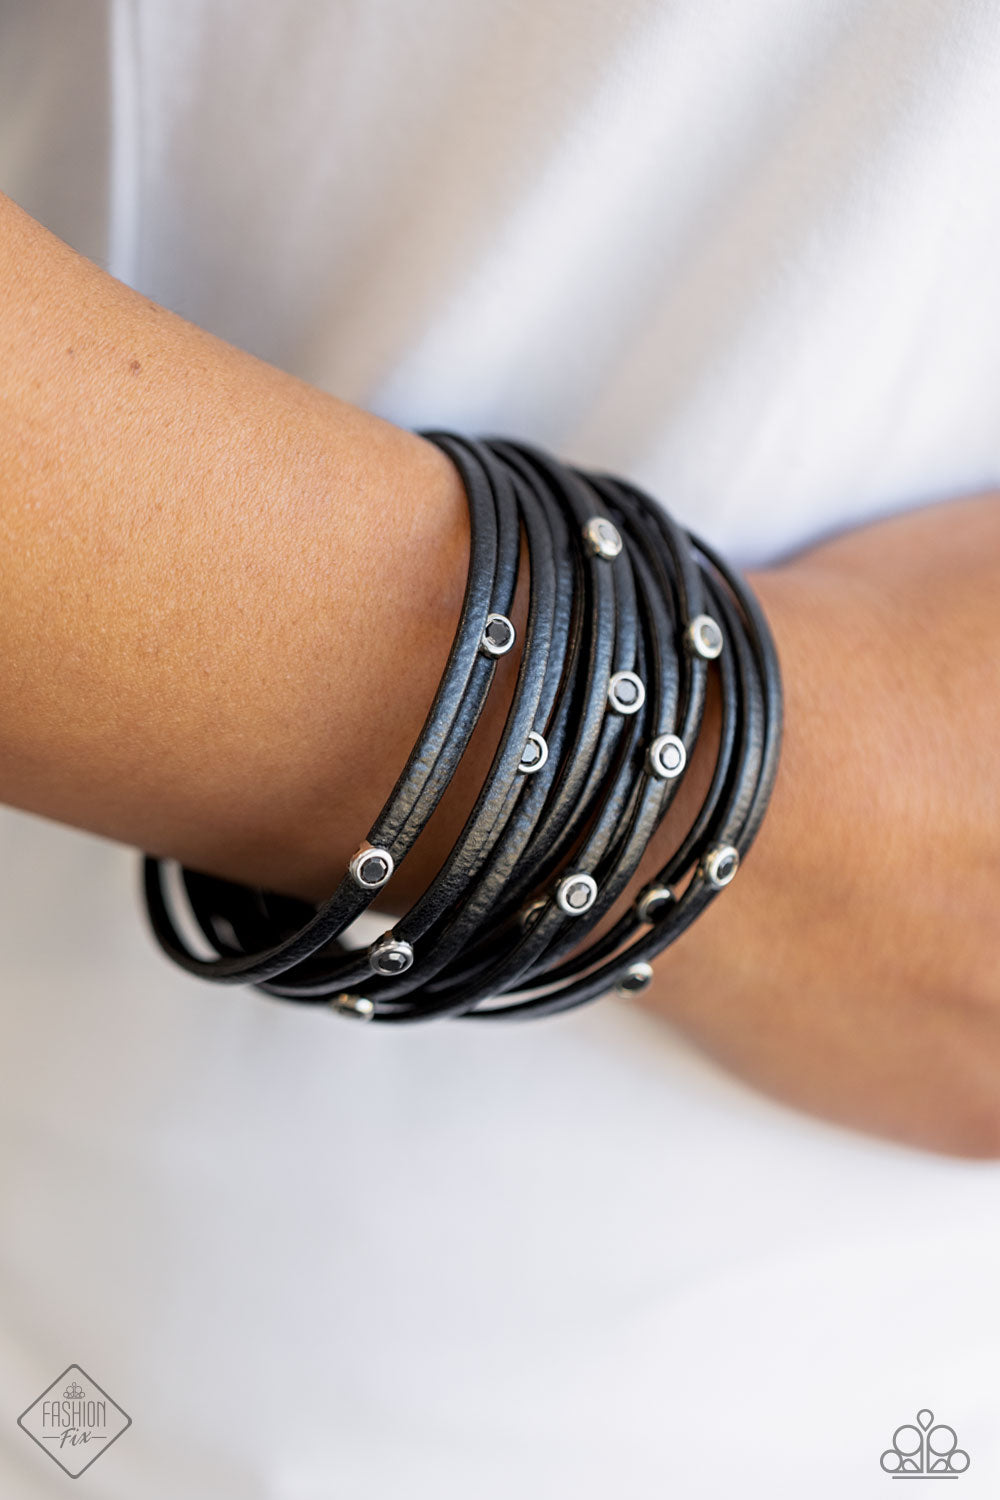 Fearlessly Layered - Black Magnetic Silver and Leather Bracelet